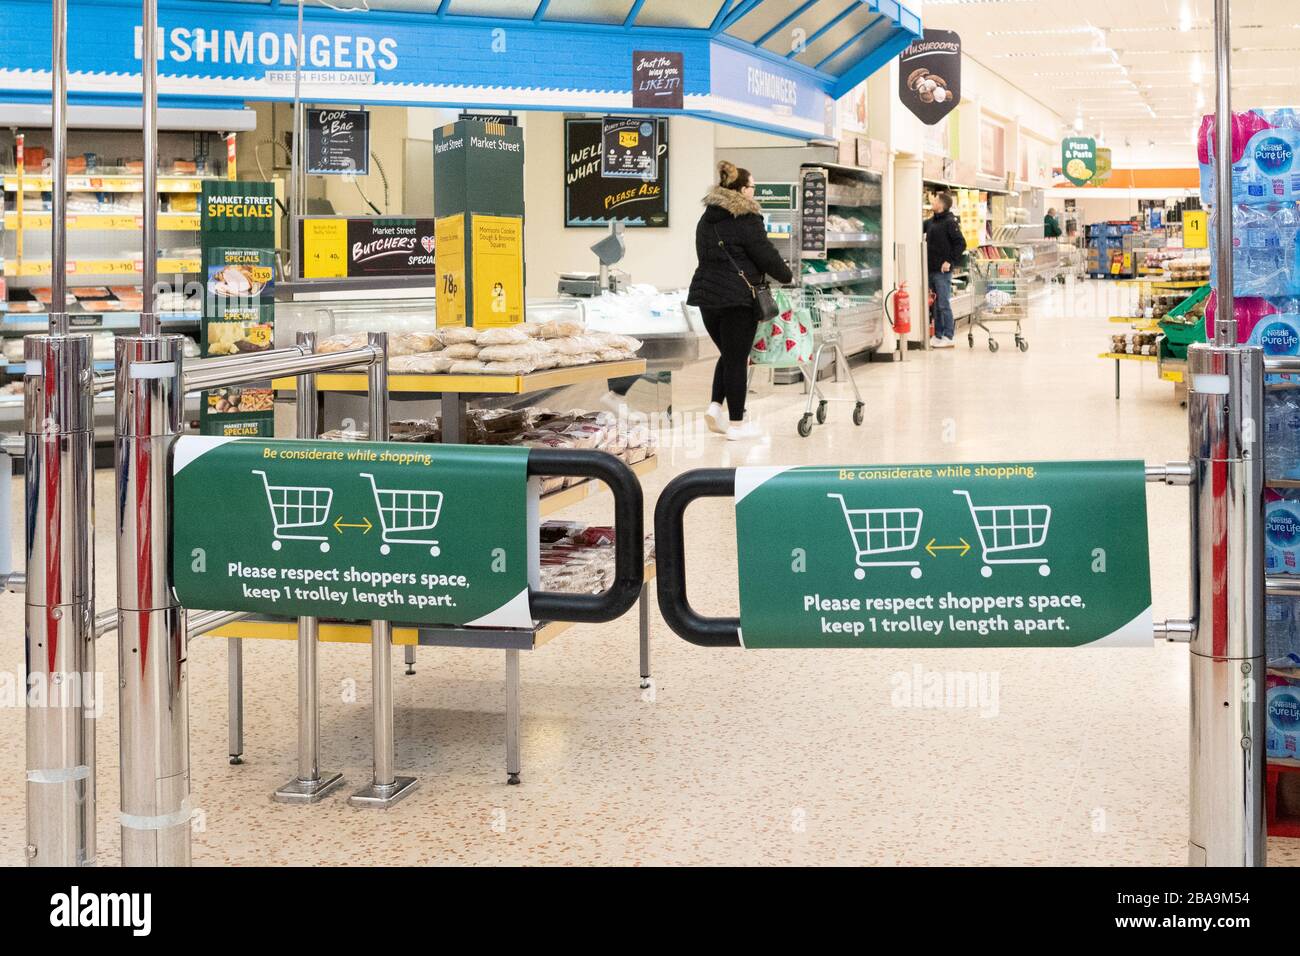 Glasgow, Scotland, UK. 26th Mar, 2020. Coronavirus lockdown Glasgow Scotland: shoppers inside a Morrisons supermarket in Glasgow. A new single queuing system is in place and restricted numbers are allowed in the store to enable customers to keep a trolley's length distance from others at all times Credit: Kay Roxby/Alamy Live News Stock Photo